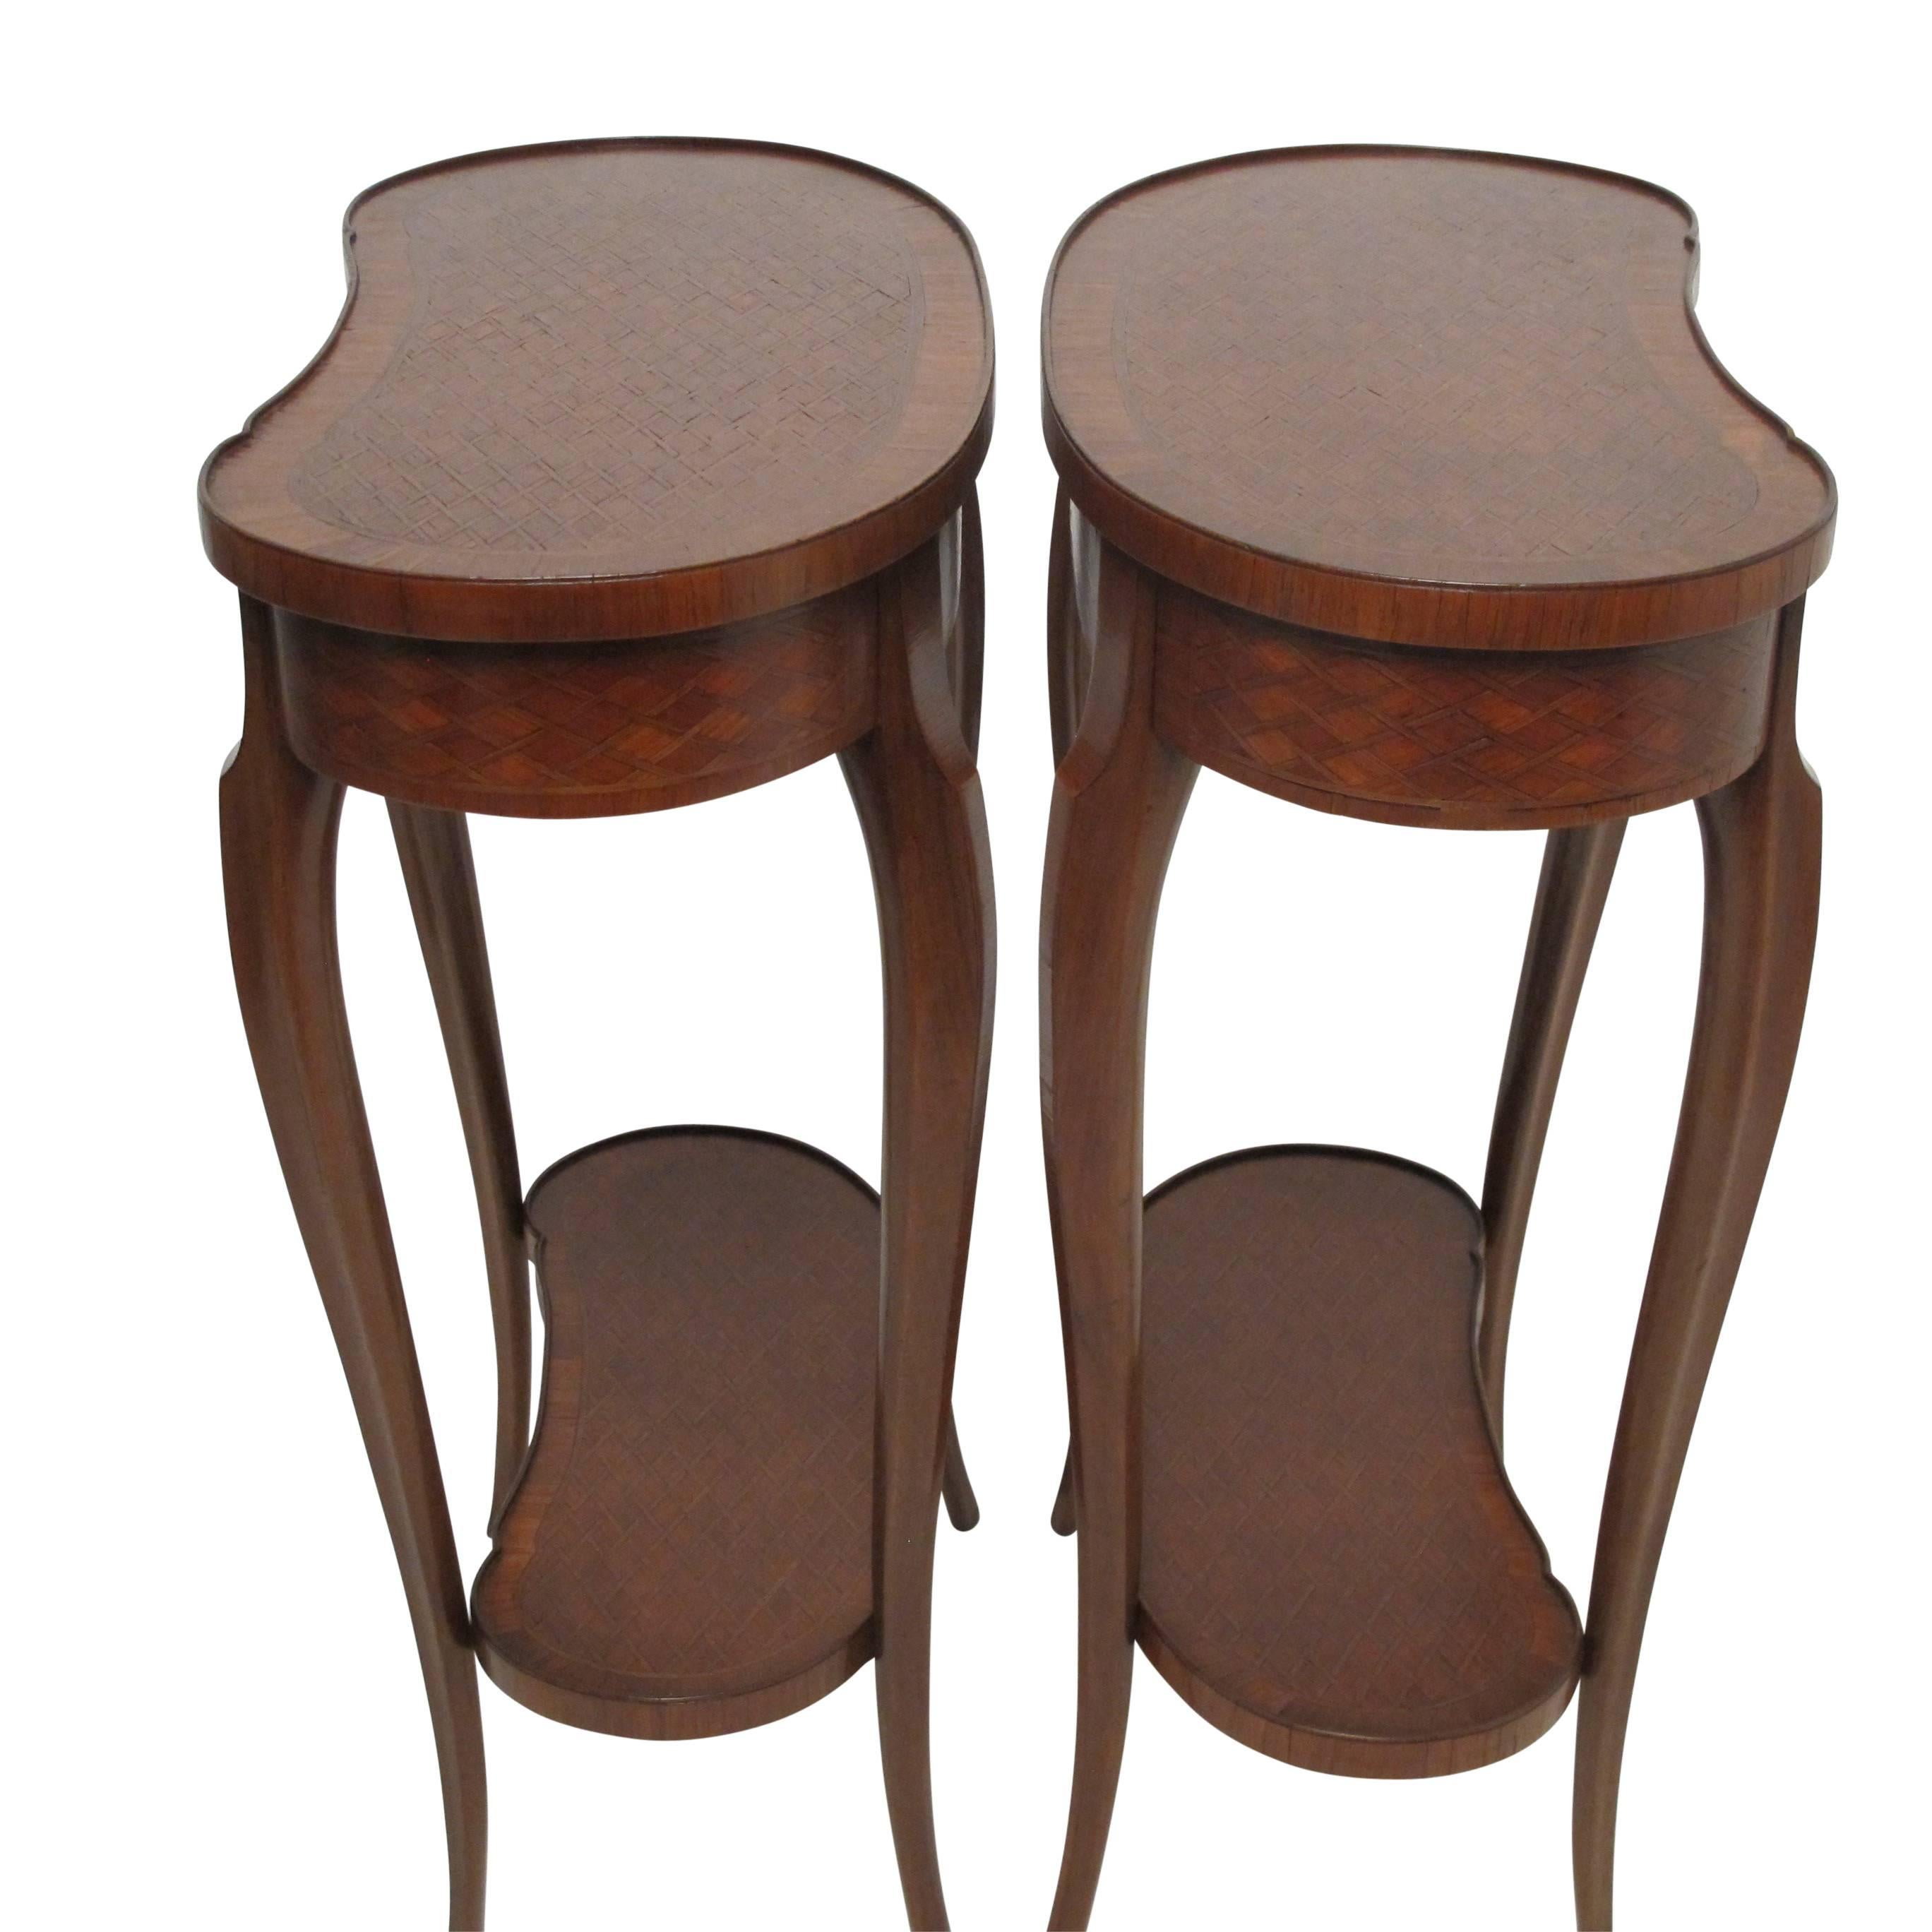 Pair of Mahogany Kidney Shape Parquetry Inlay Side Tables, French, circa 1900 1